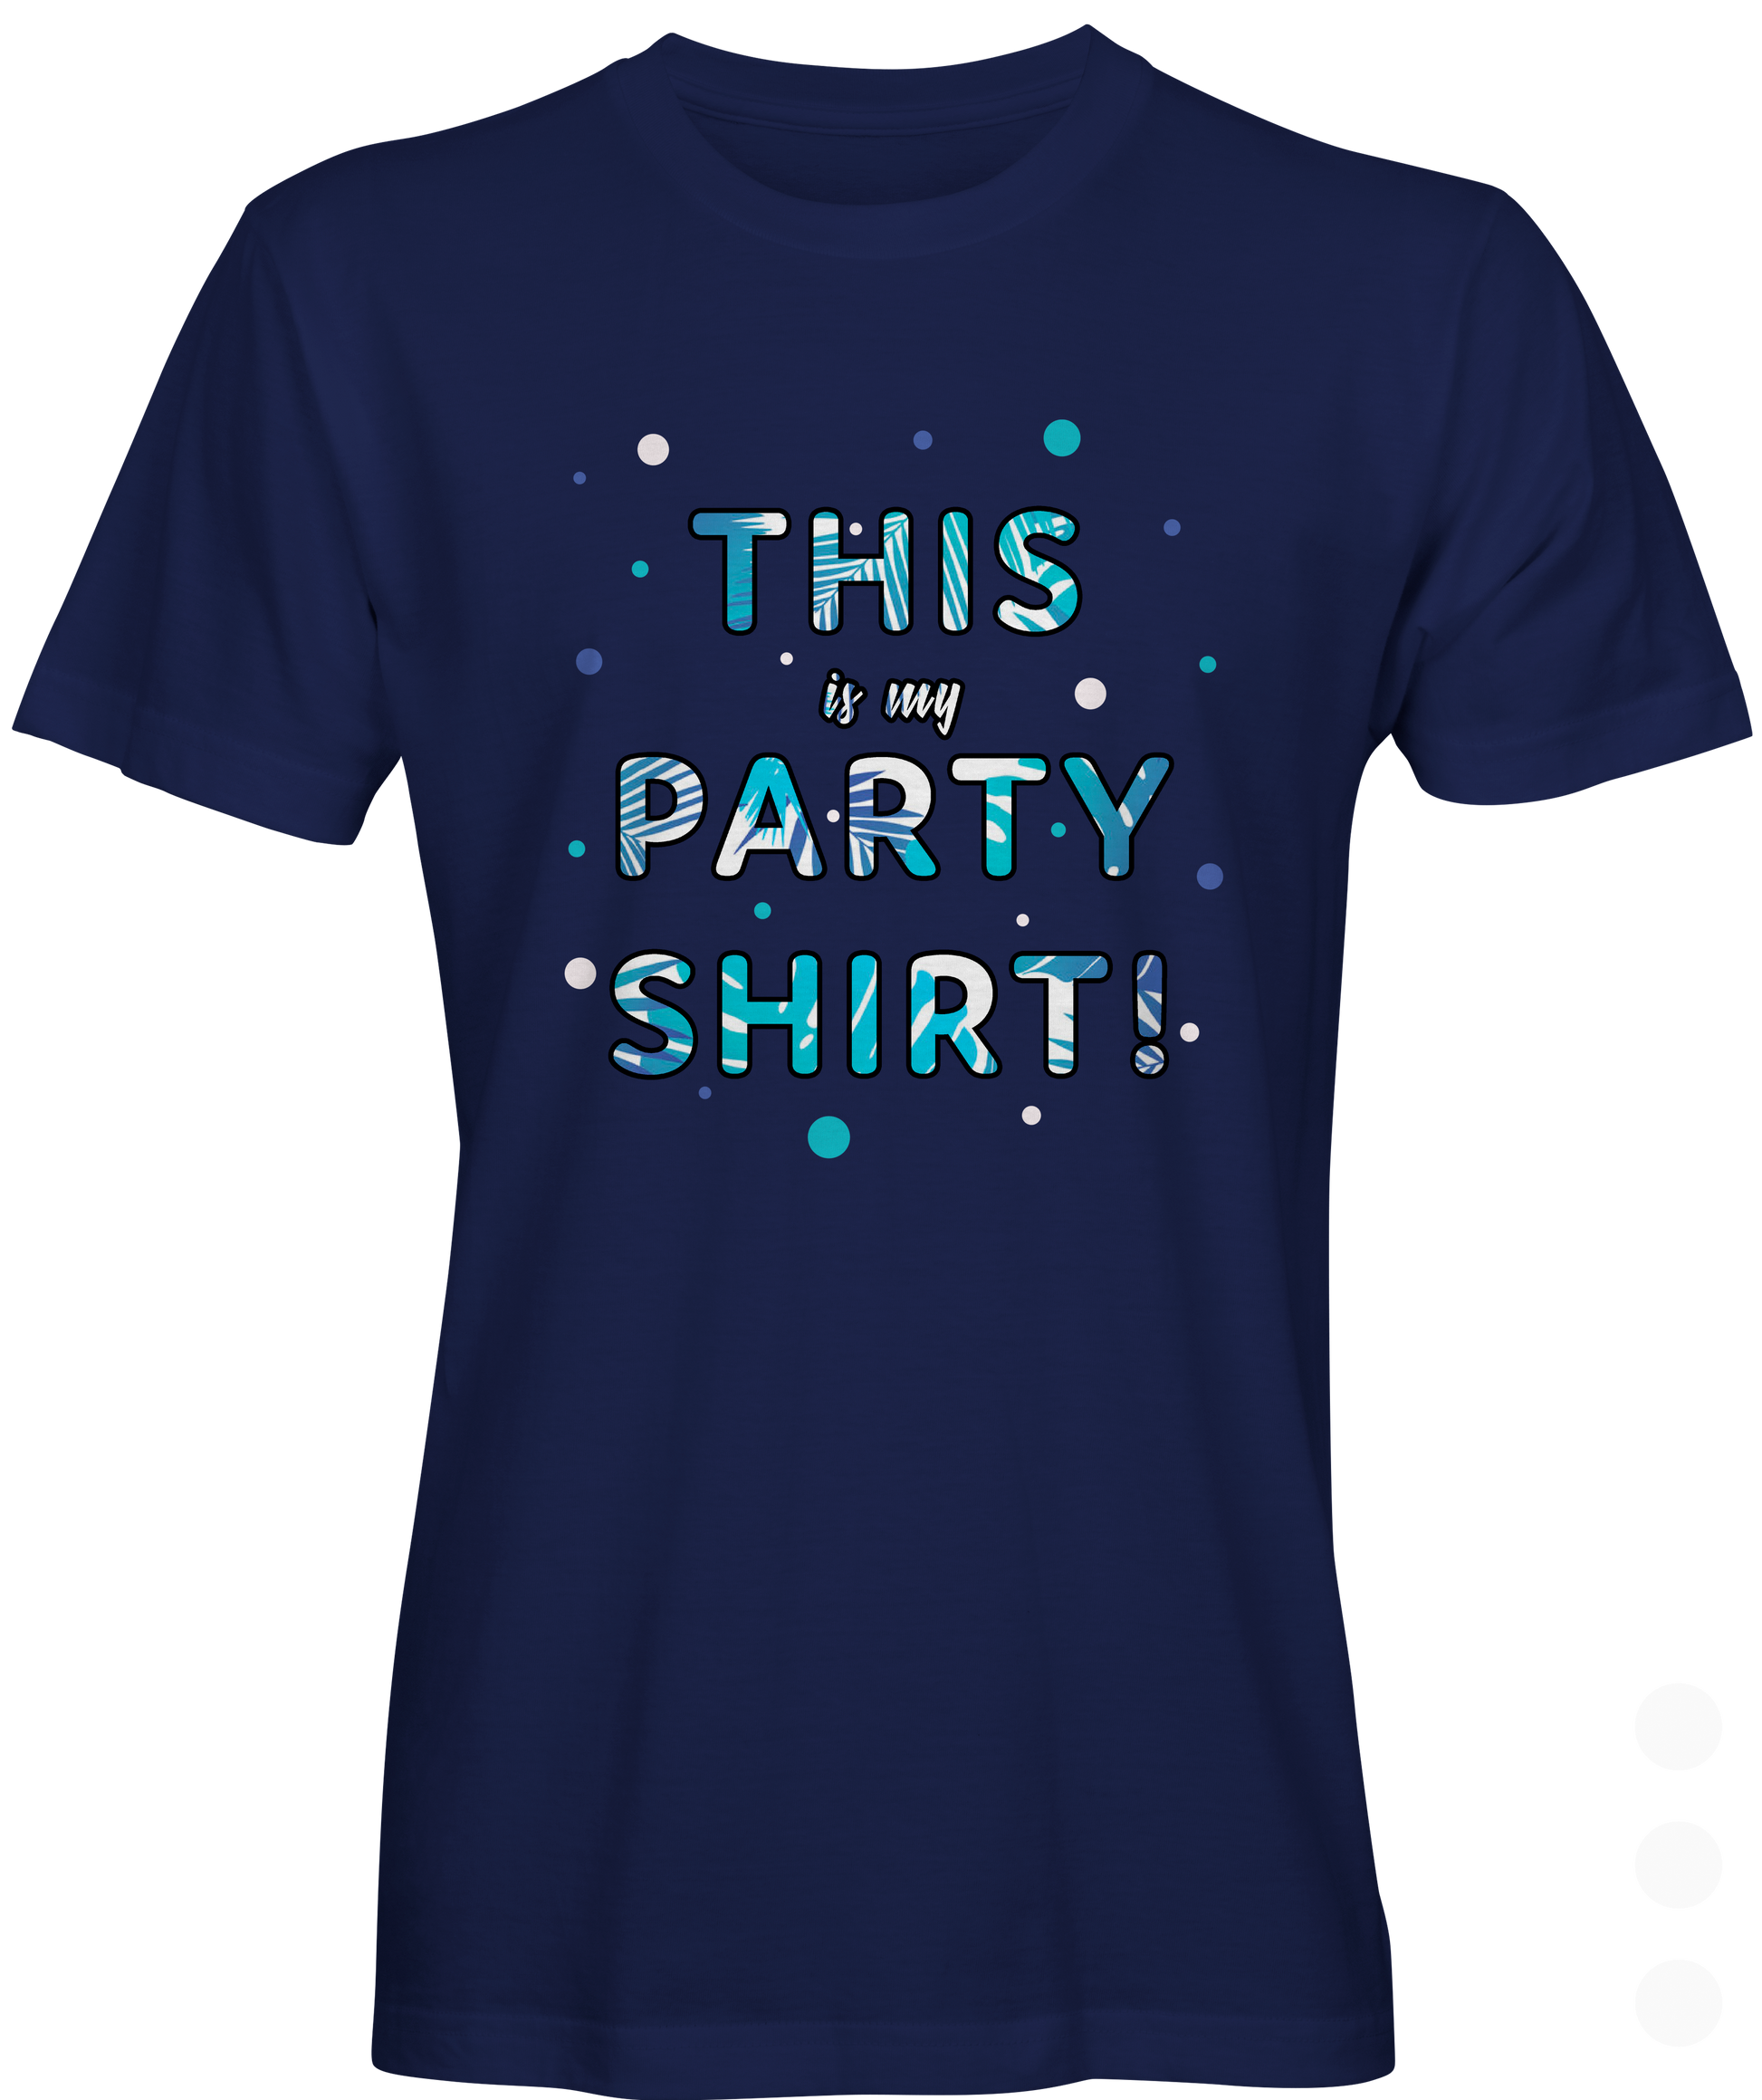 Colorful Party Graphic T-shirt